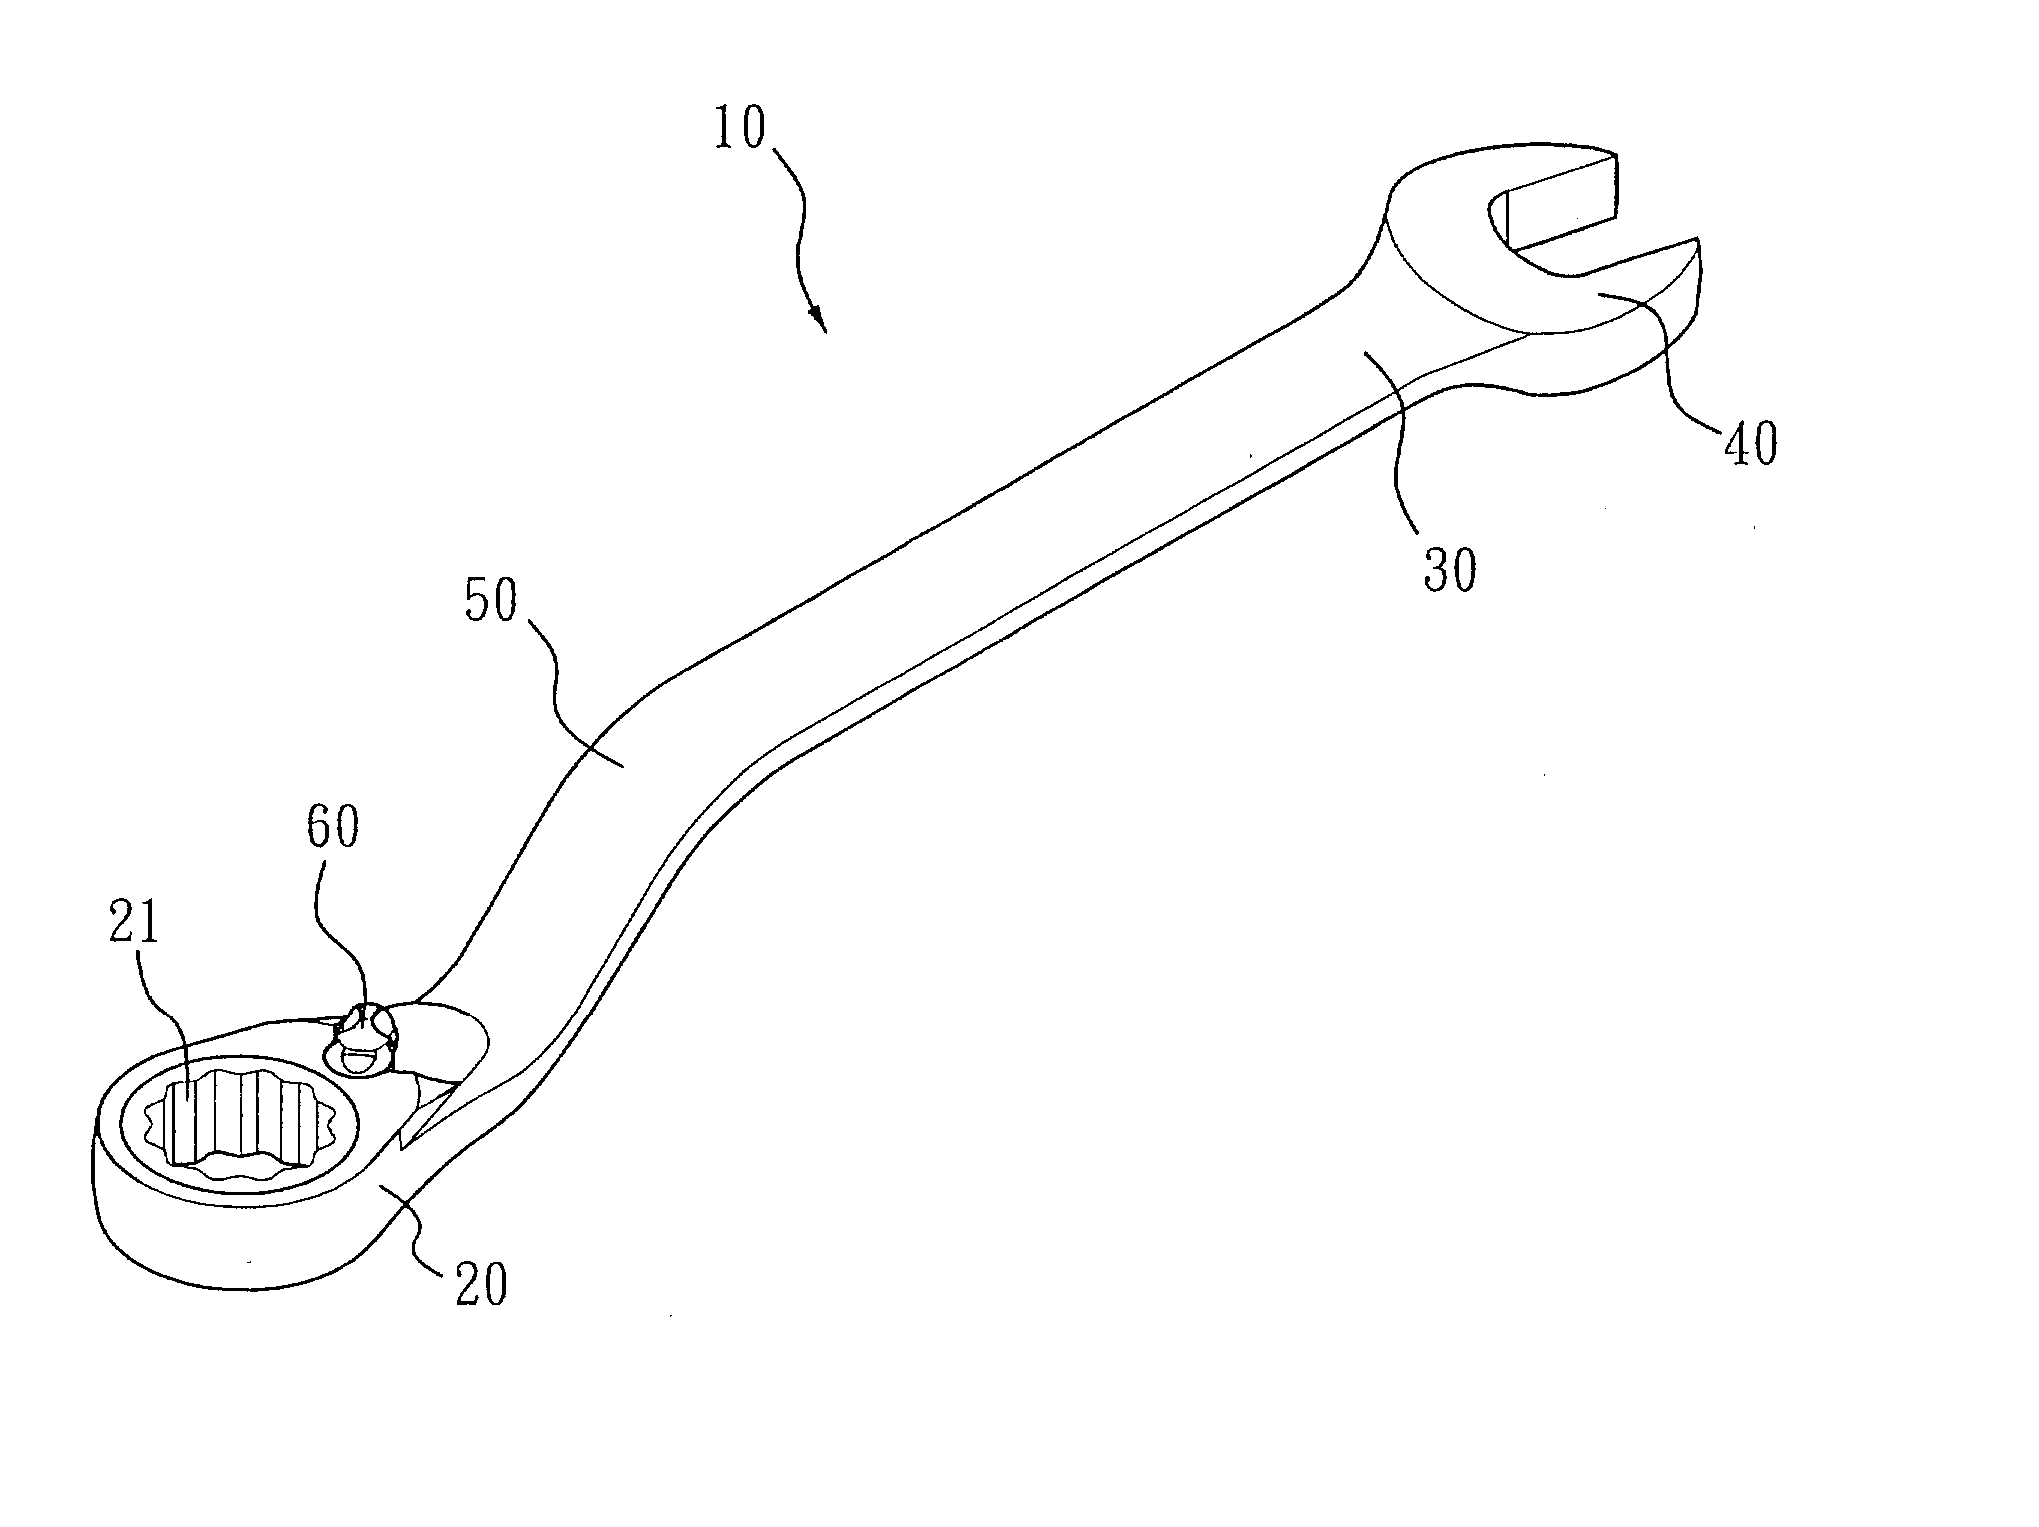 Gear wrench allowing easy force application